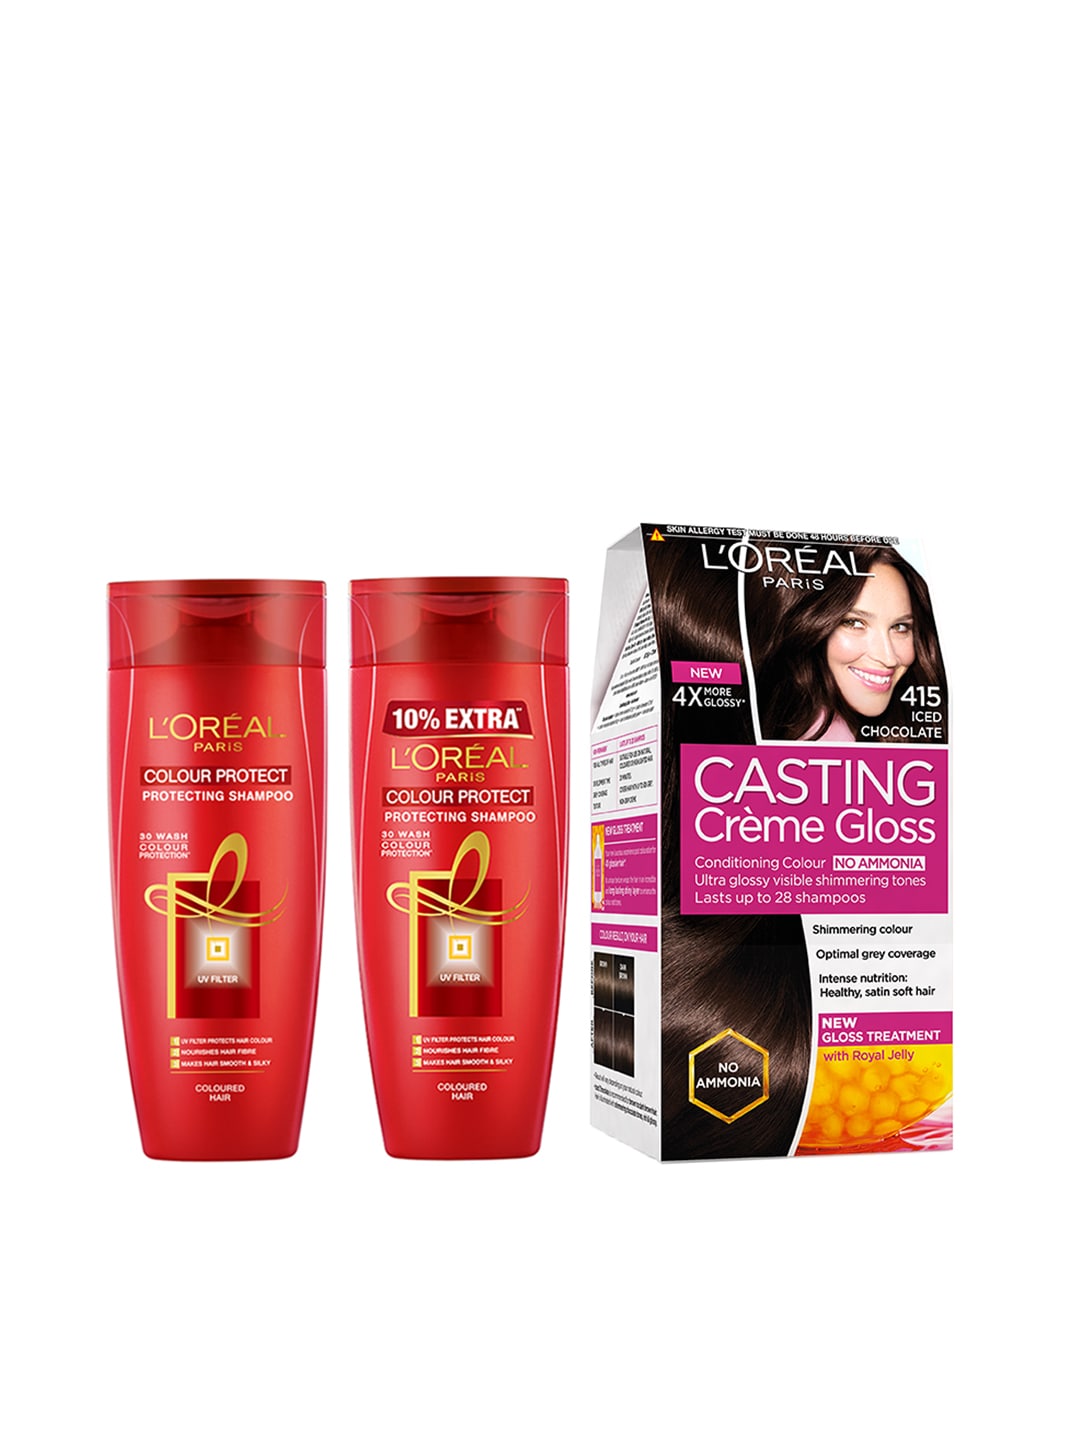 L'Oreal Paris Pack of 2 Colour Protect Shampoo & Casting Creme Gloss Hair Color Chocolate Price in India